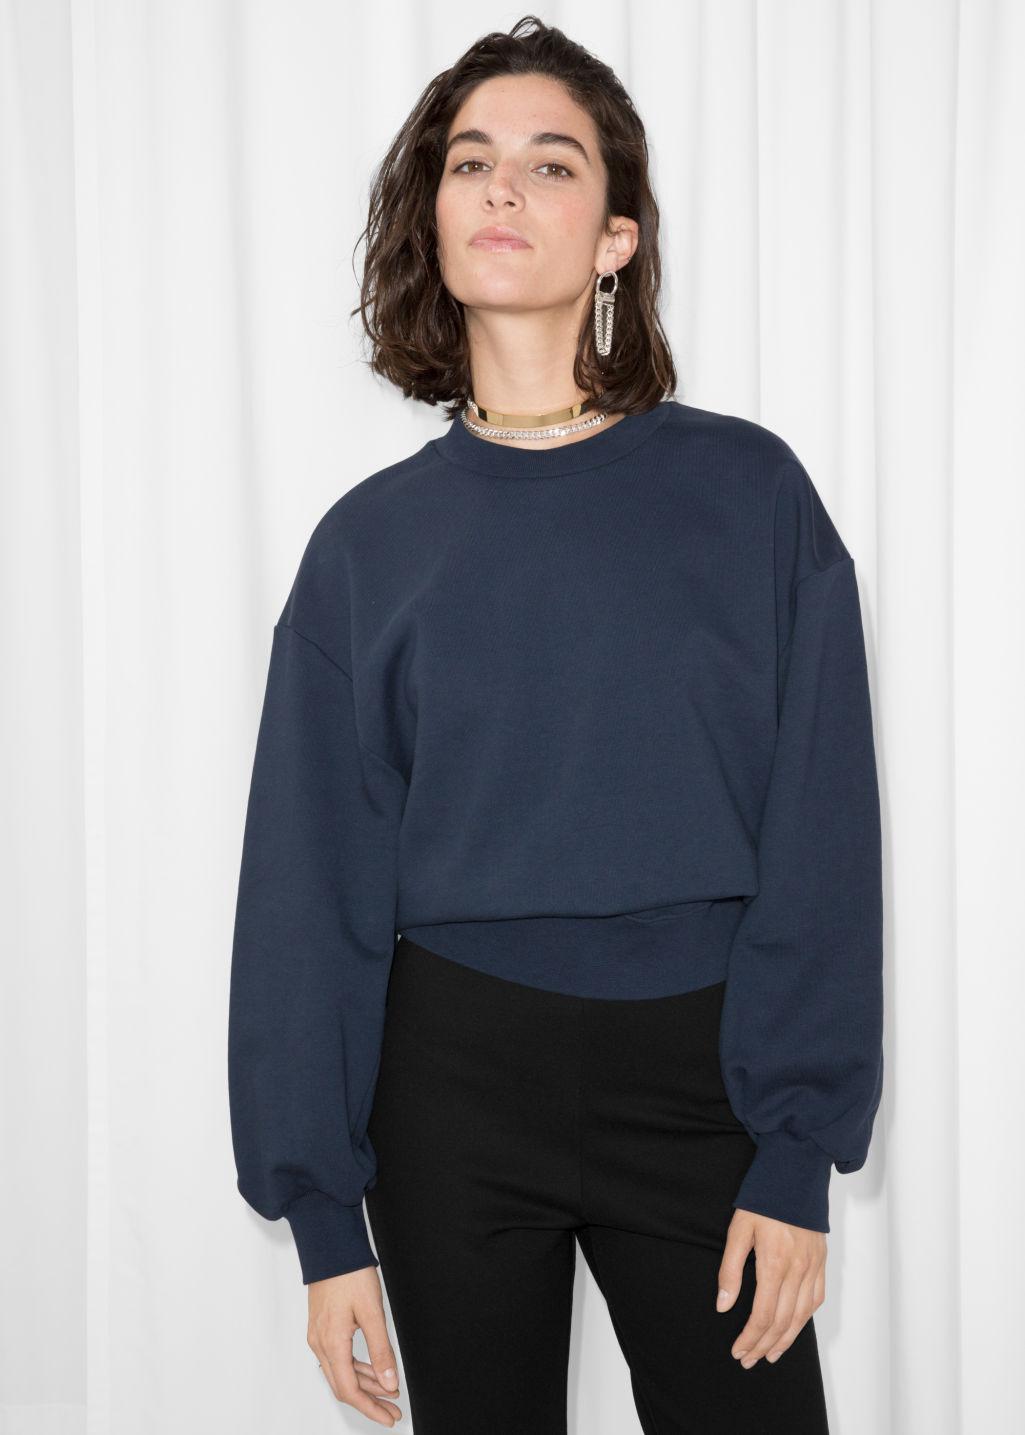 & Other Stories Cotton Boxy Sweatshirt in Blue - Lyst